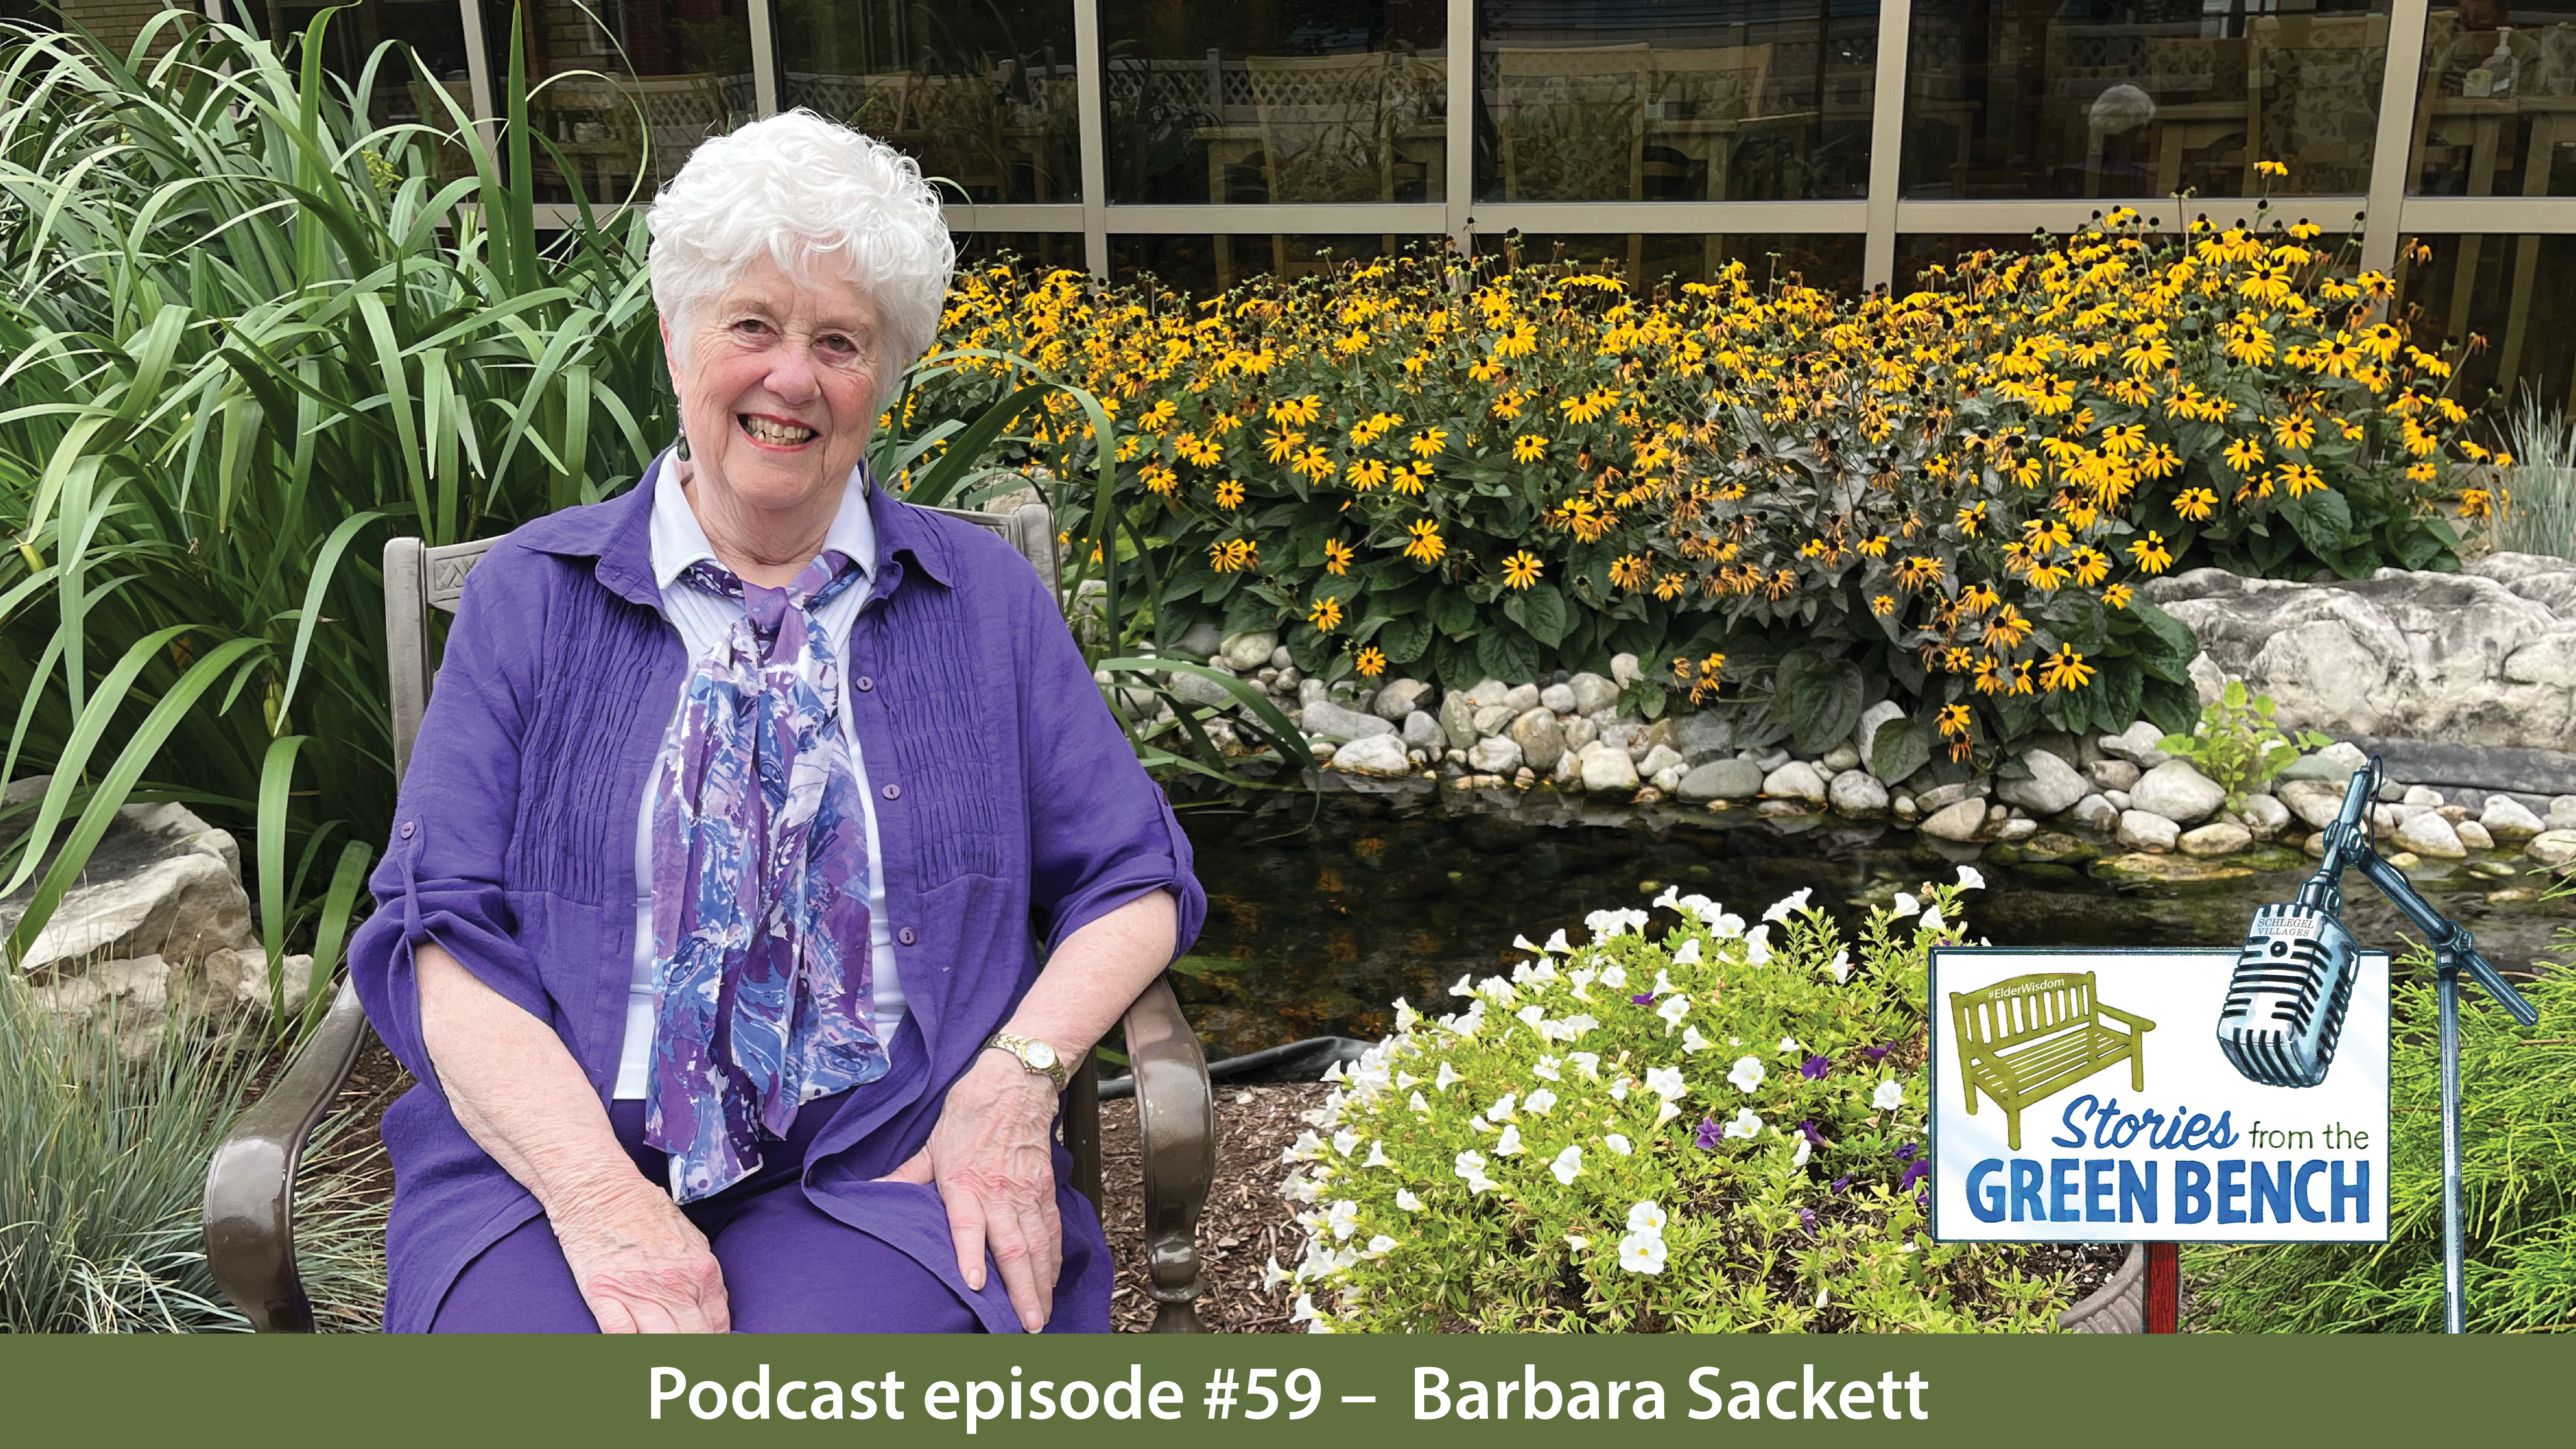 Barbara Sackett at the garden promoting her episode of the #ElderWisdom | Stories from the Green Bench podcast